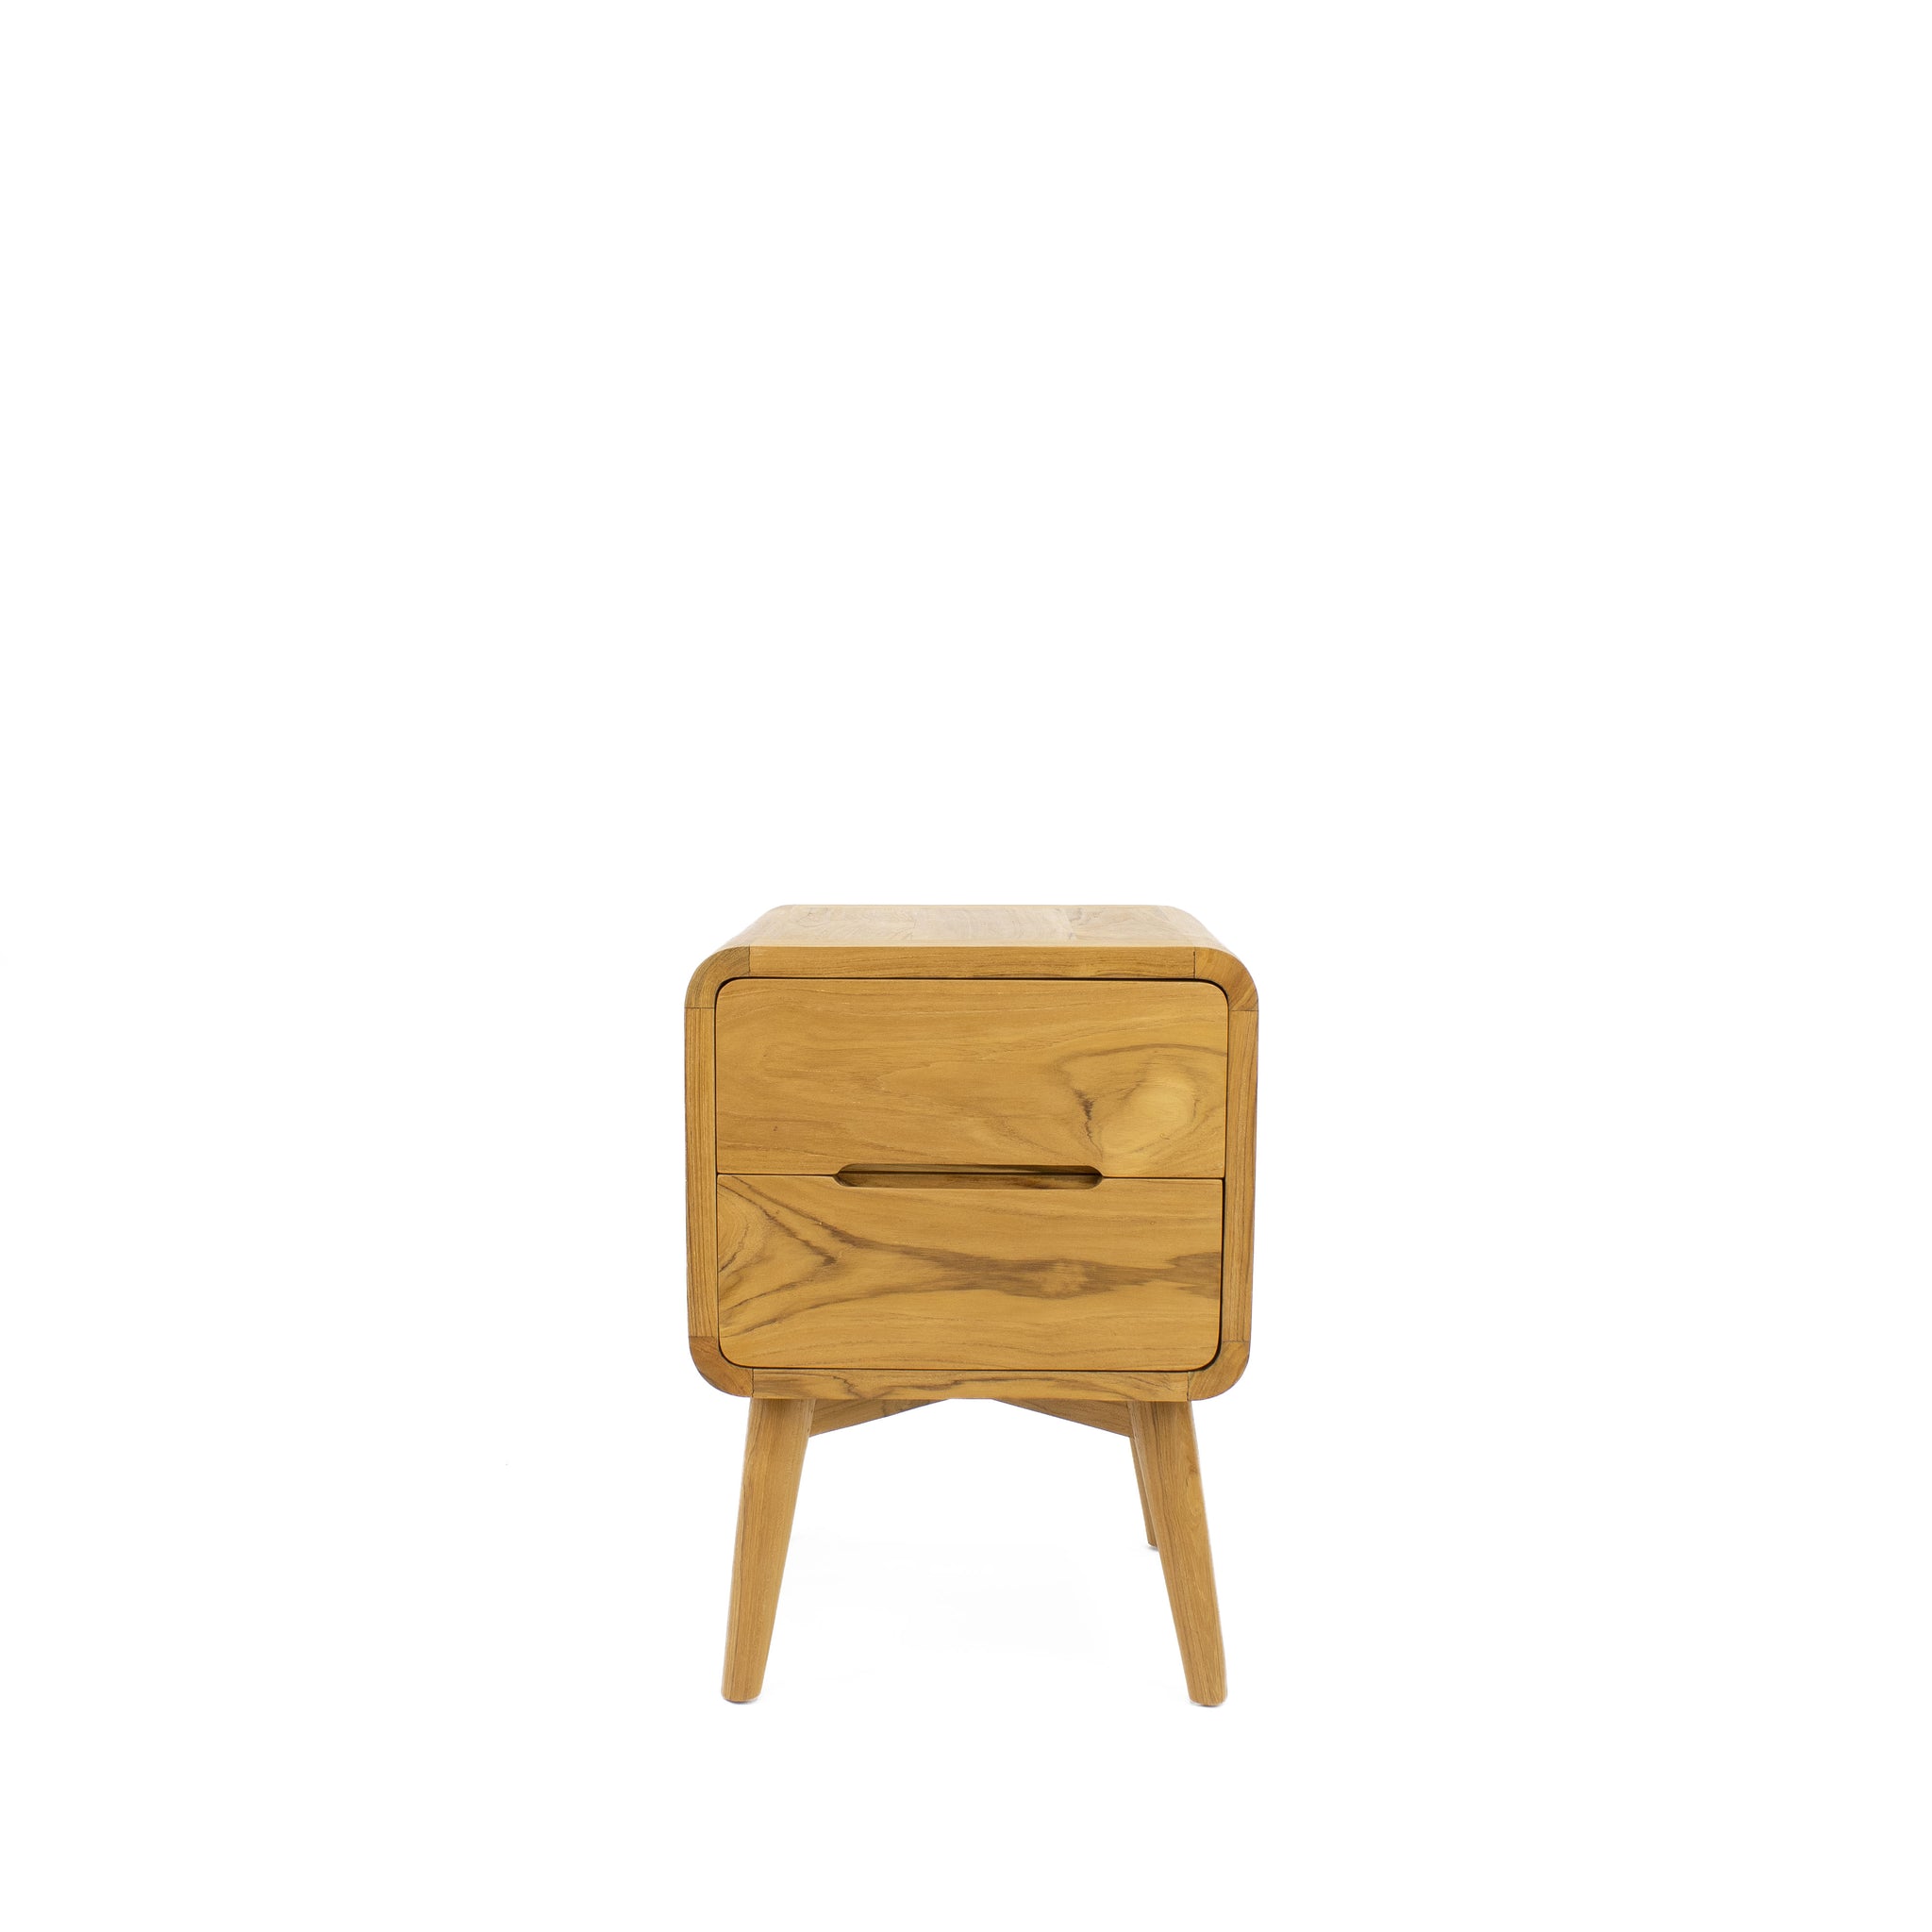 Holland Side Table